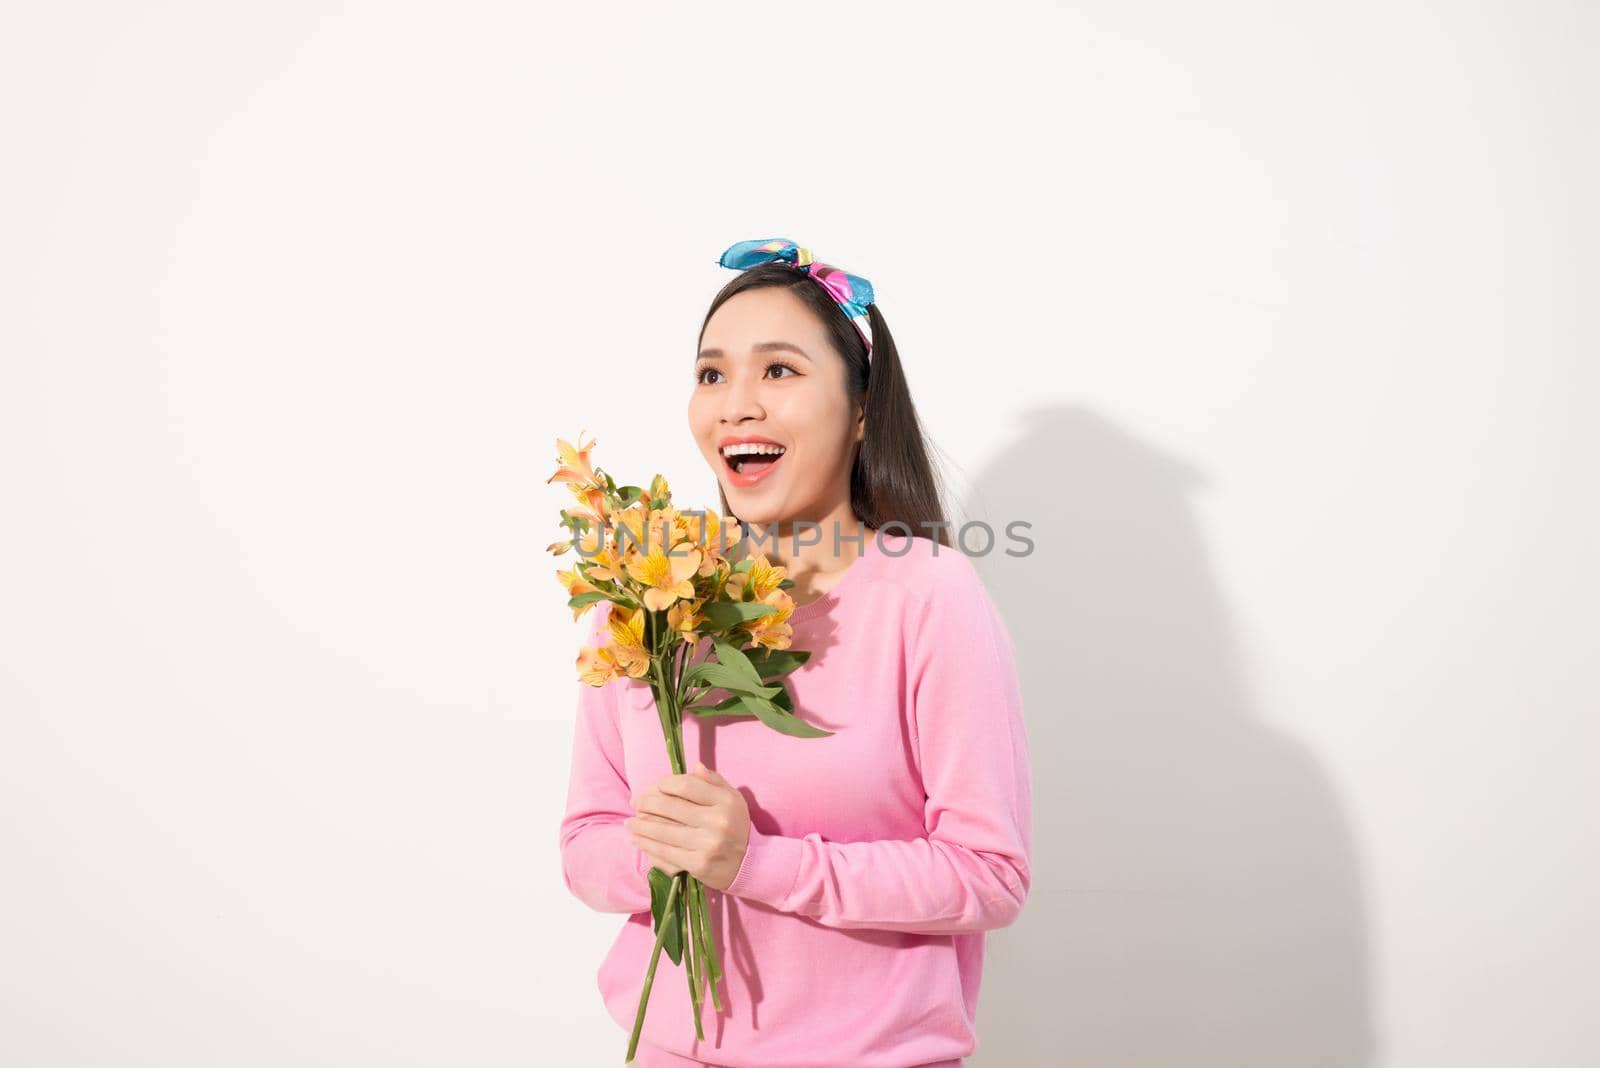 Lifestyle leisure international women's day concept. Close up portrait of lovely cute adorable excited delightful attractive woman holding flowers isolated on white background